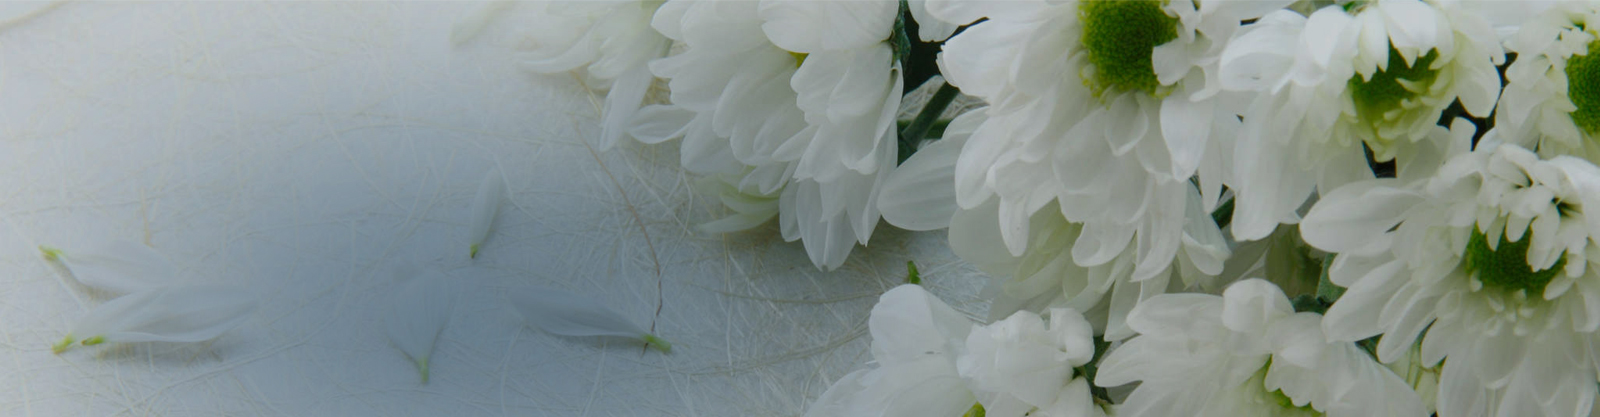 | Cremation & Burial Services | Traditional, Green & Natural Funerals in Newton NJ